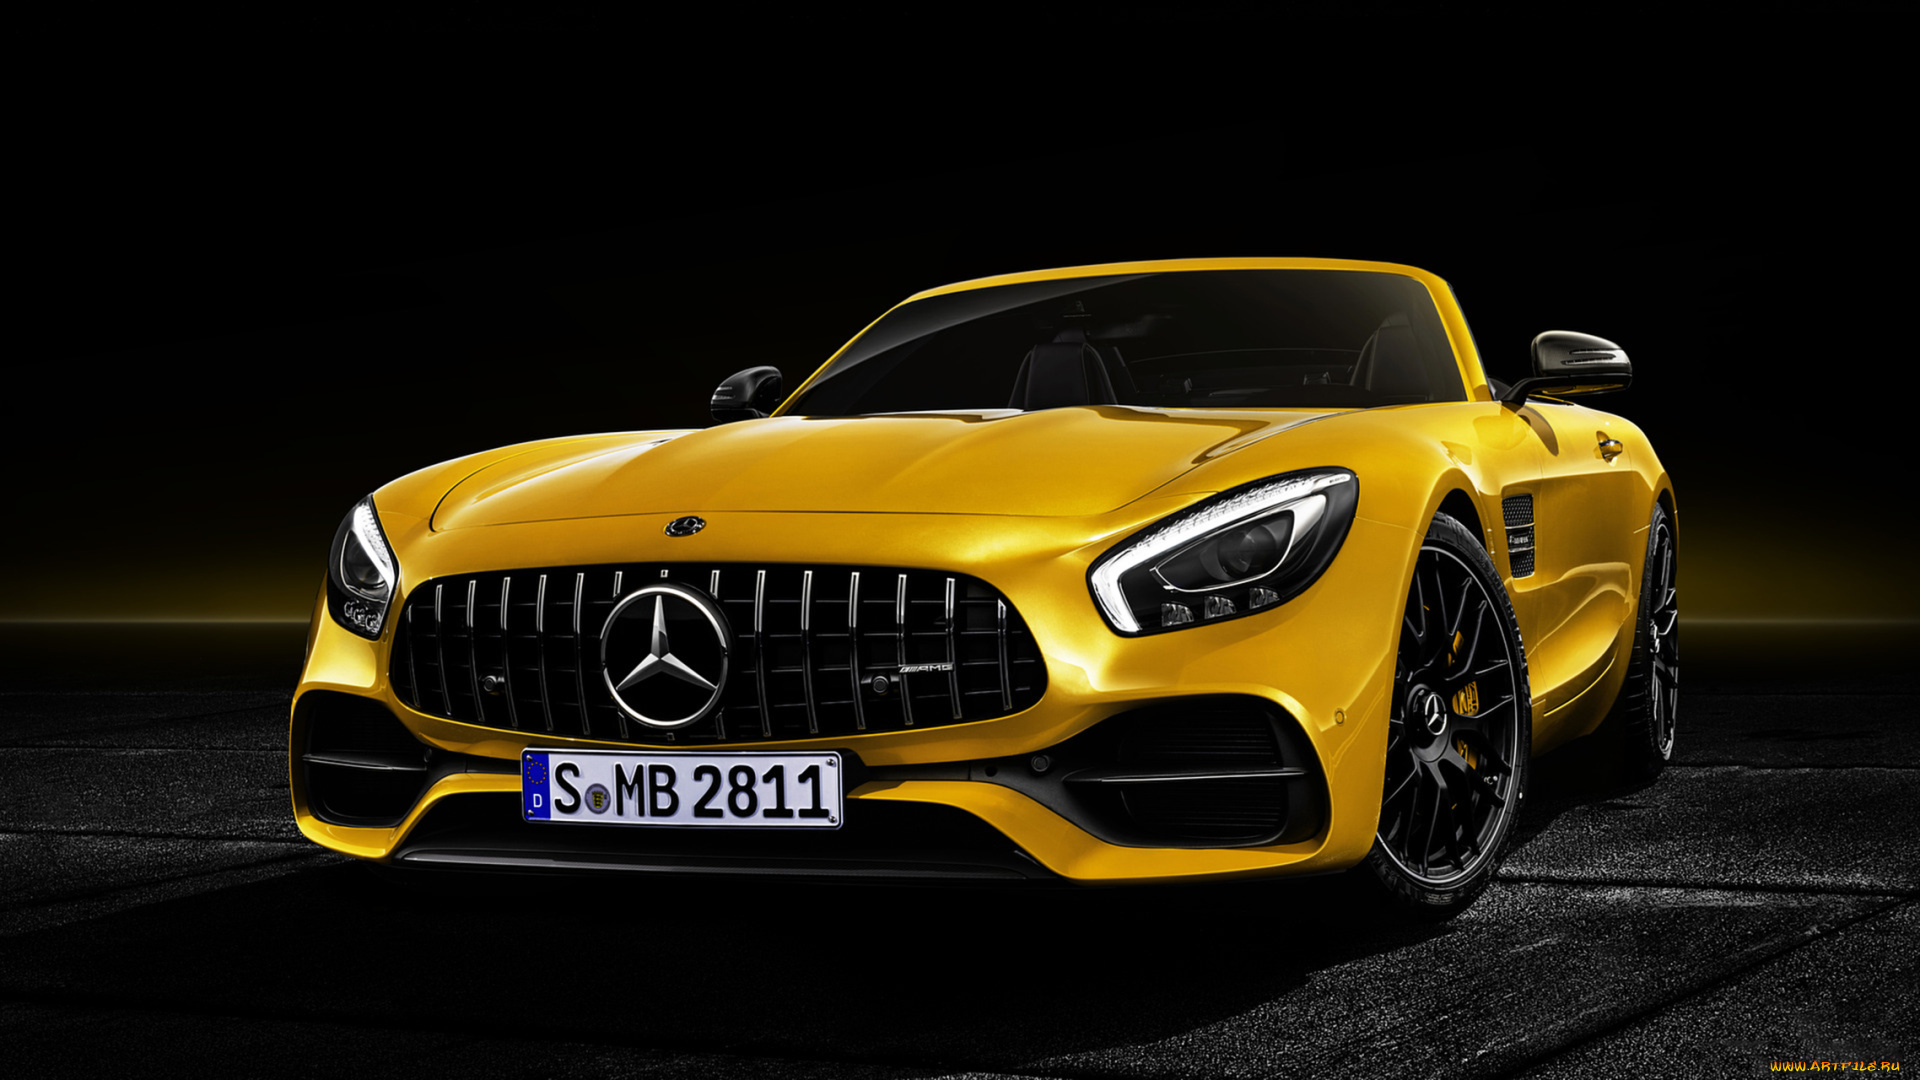 mercedes-benz, amg, gt, s, roadster, 2019, автомобили, mercedes-benz, s, жёлтый, 2019, roadster, gt, amg